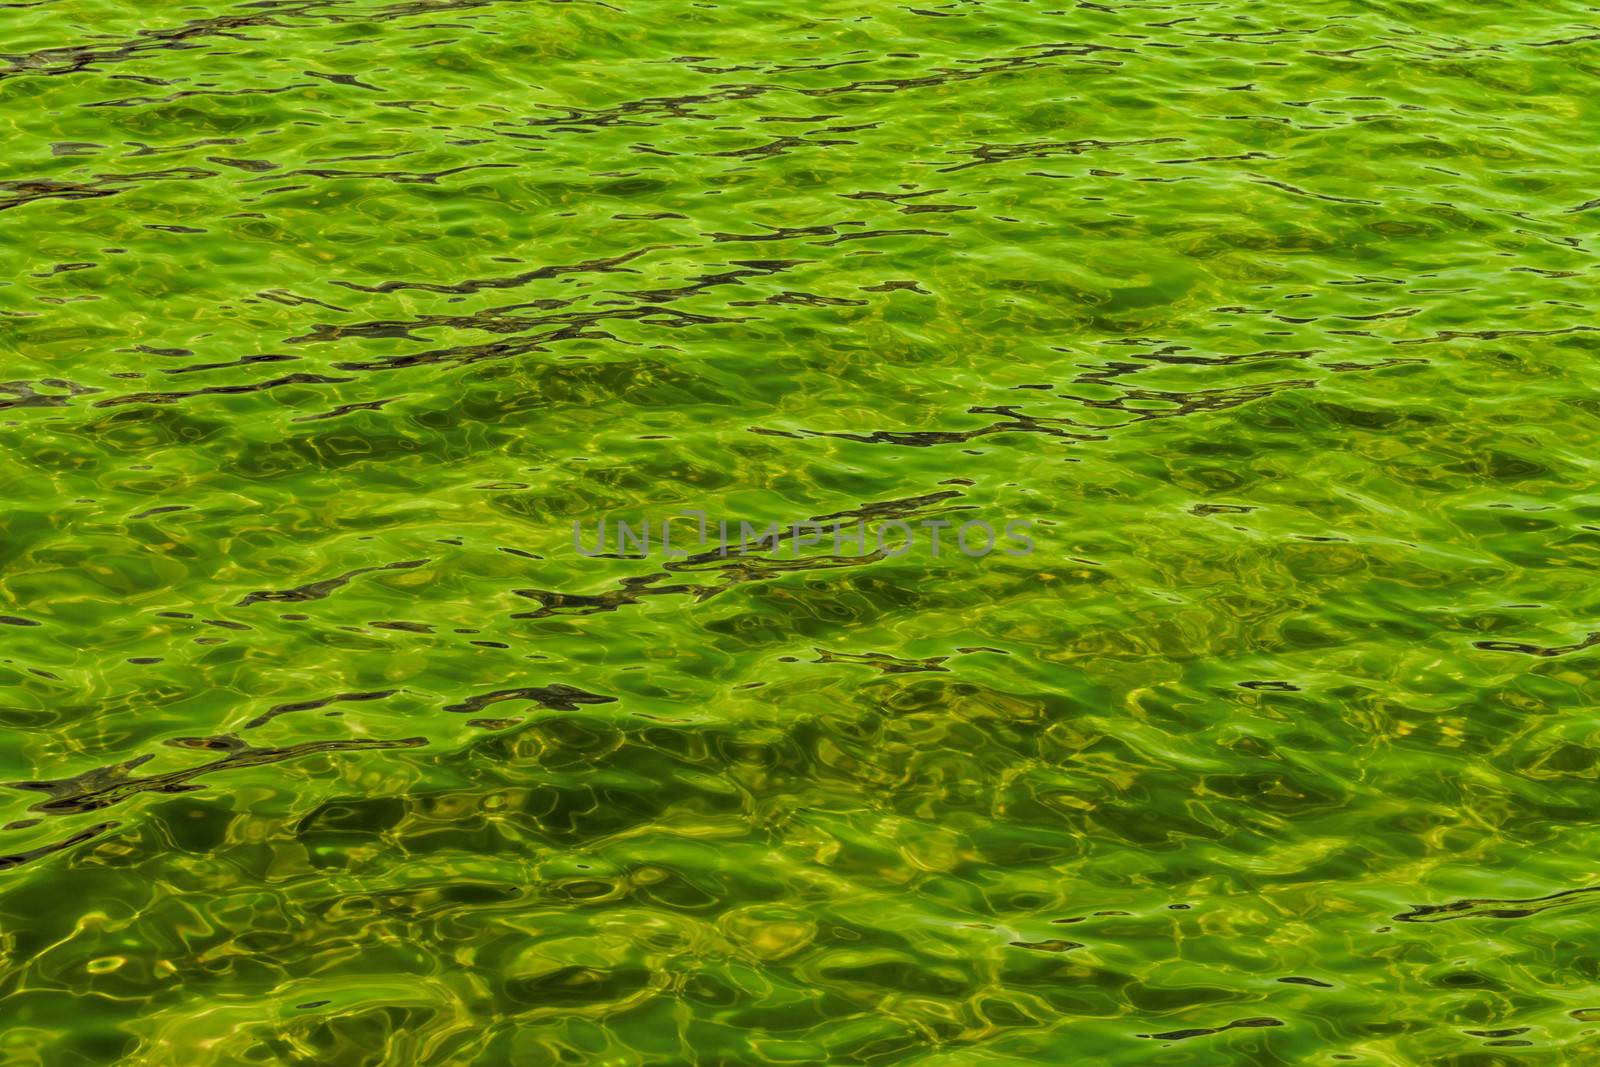 poison green abstract background of wavy water surface